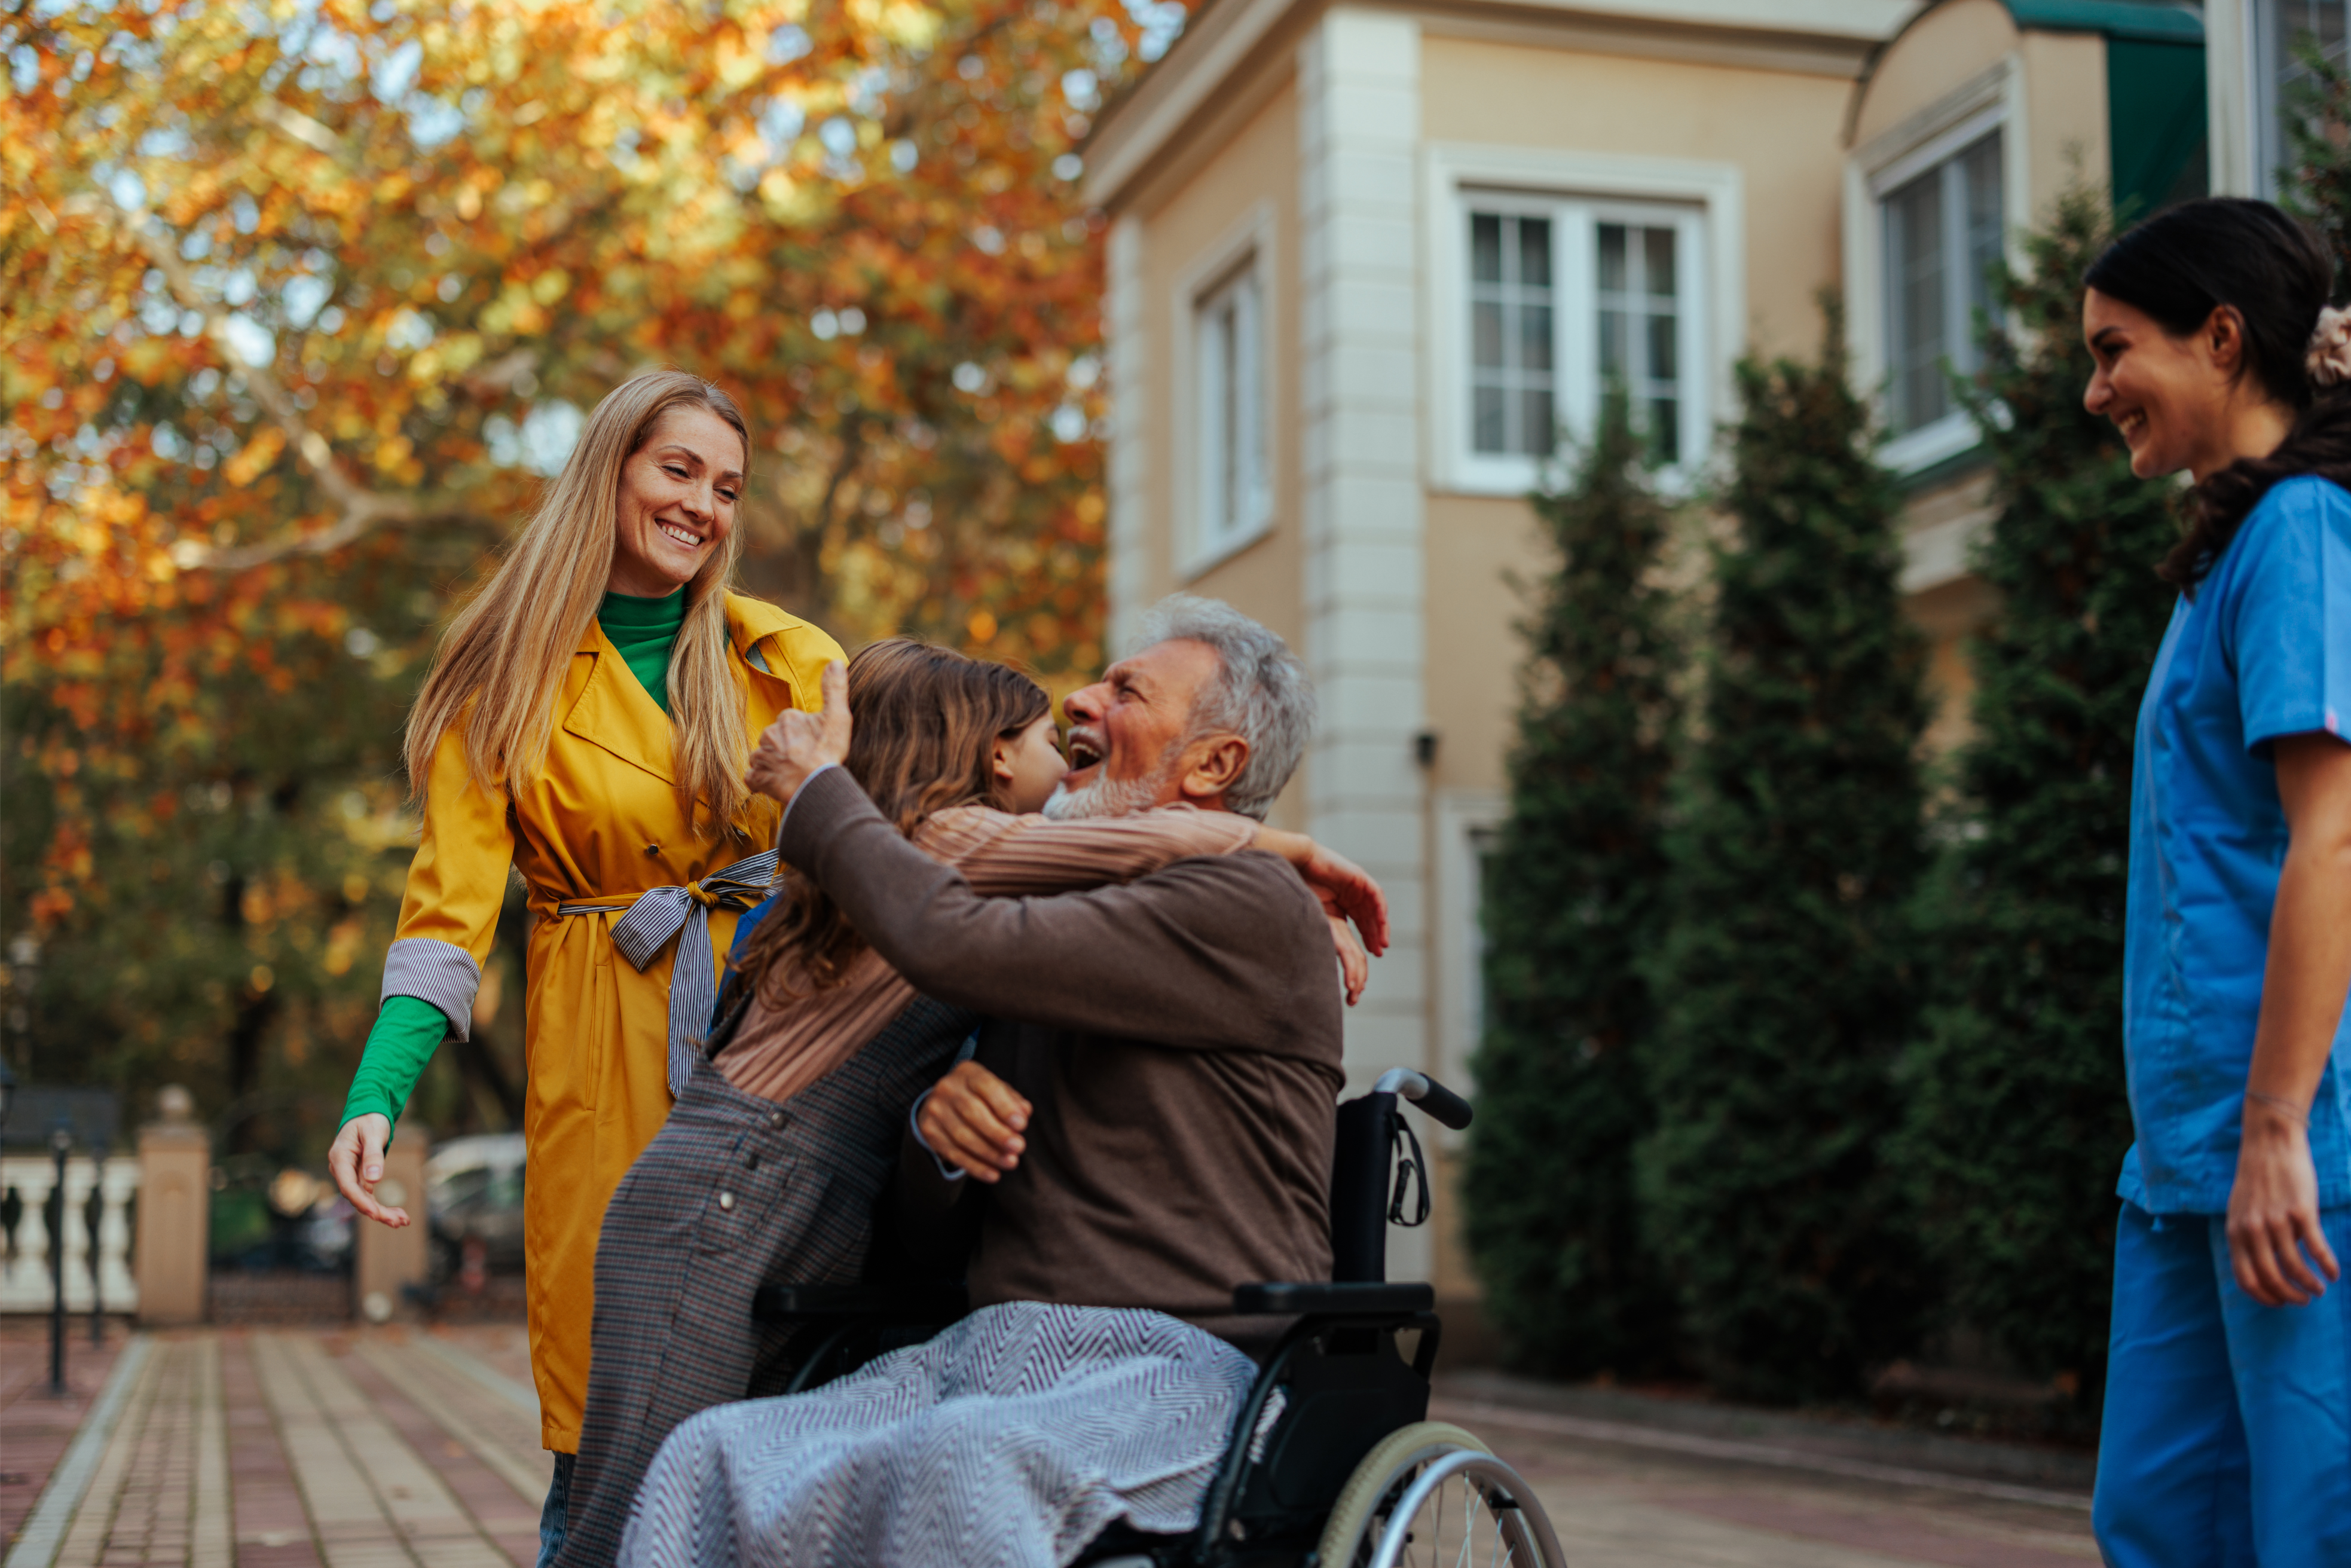 Protecting Your Loved Ones: Ensuring Quality Care During Holiday Visits To Nursing Homes